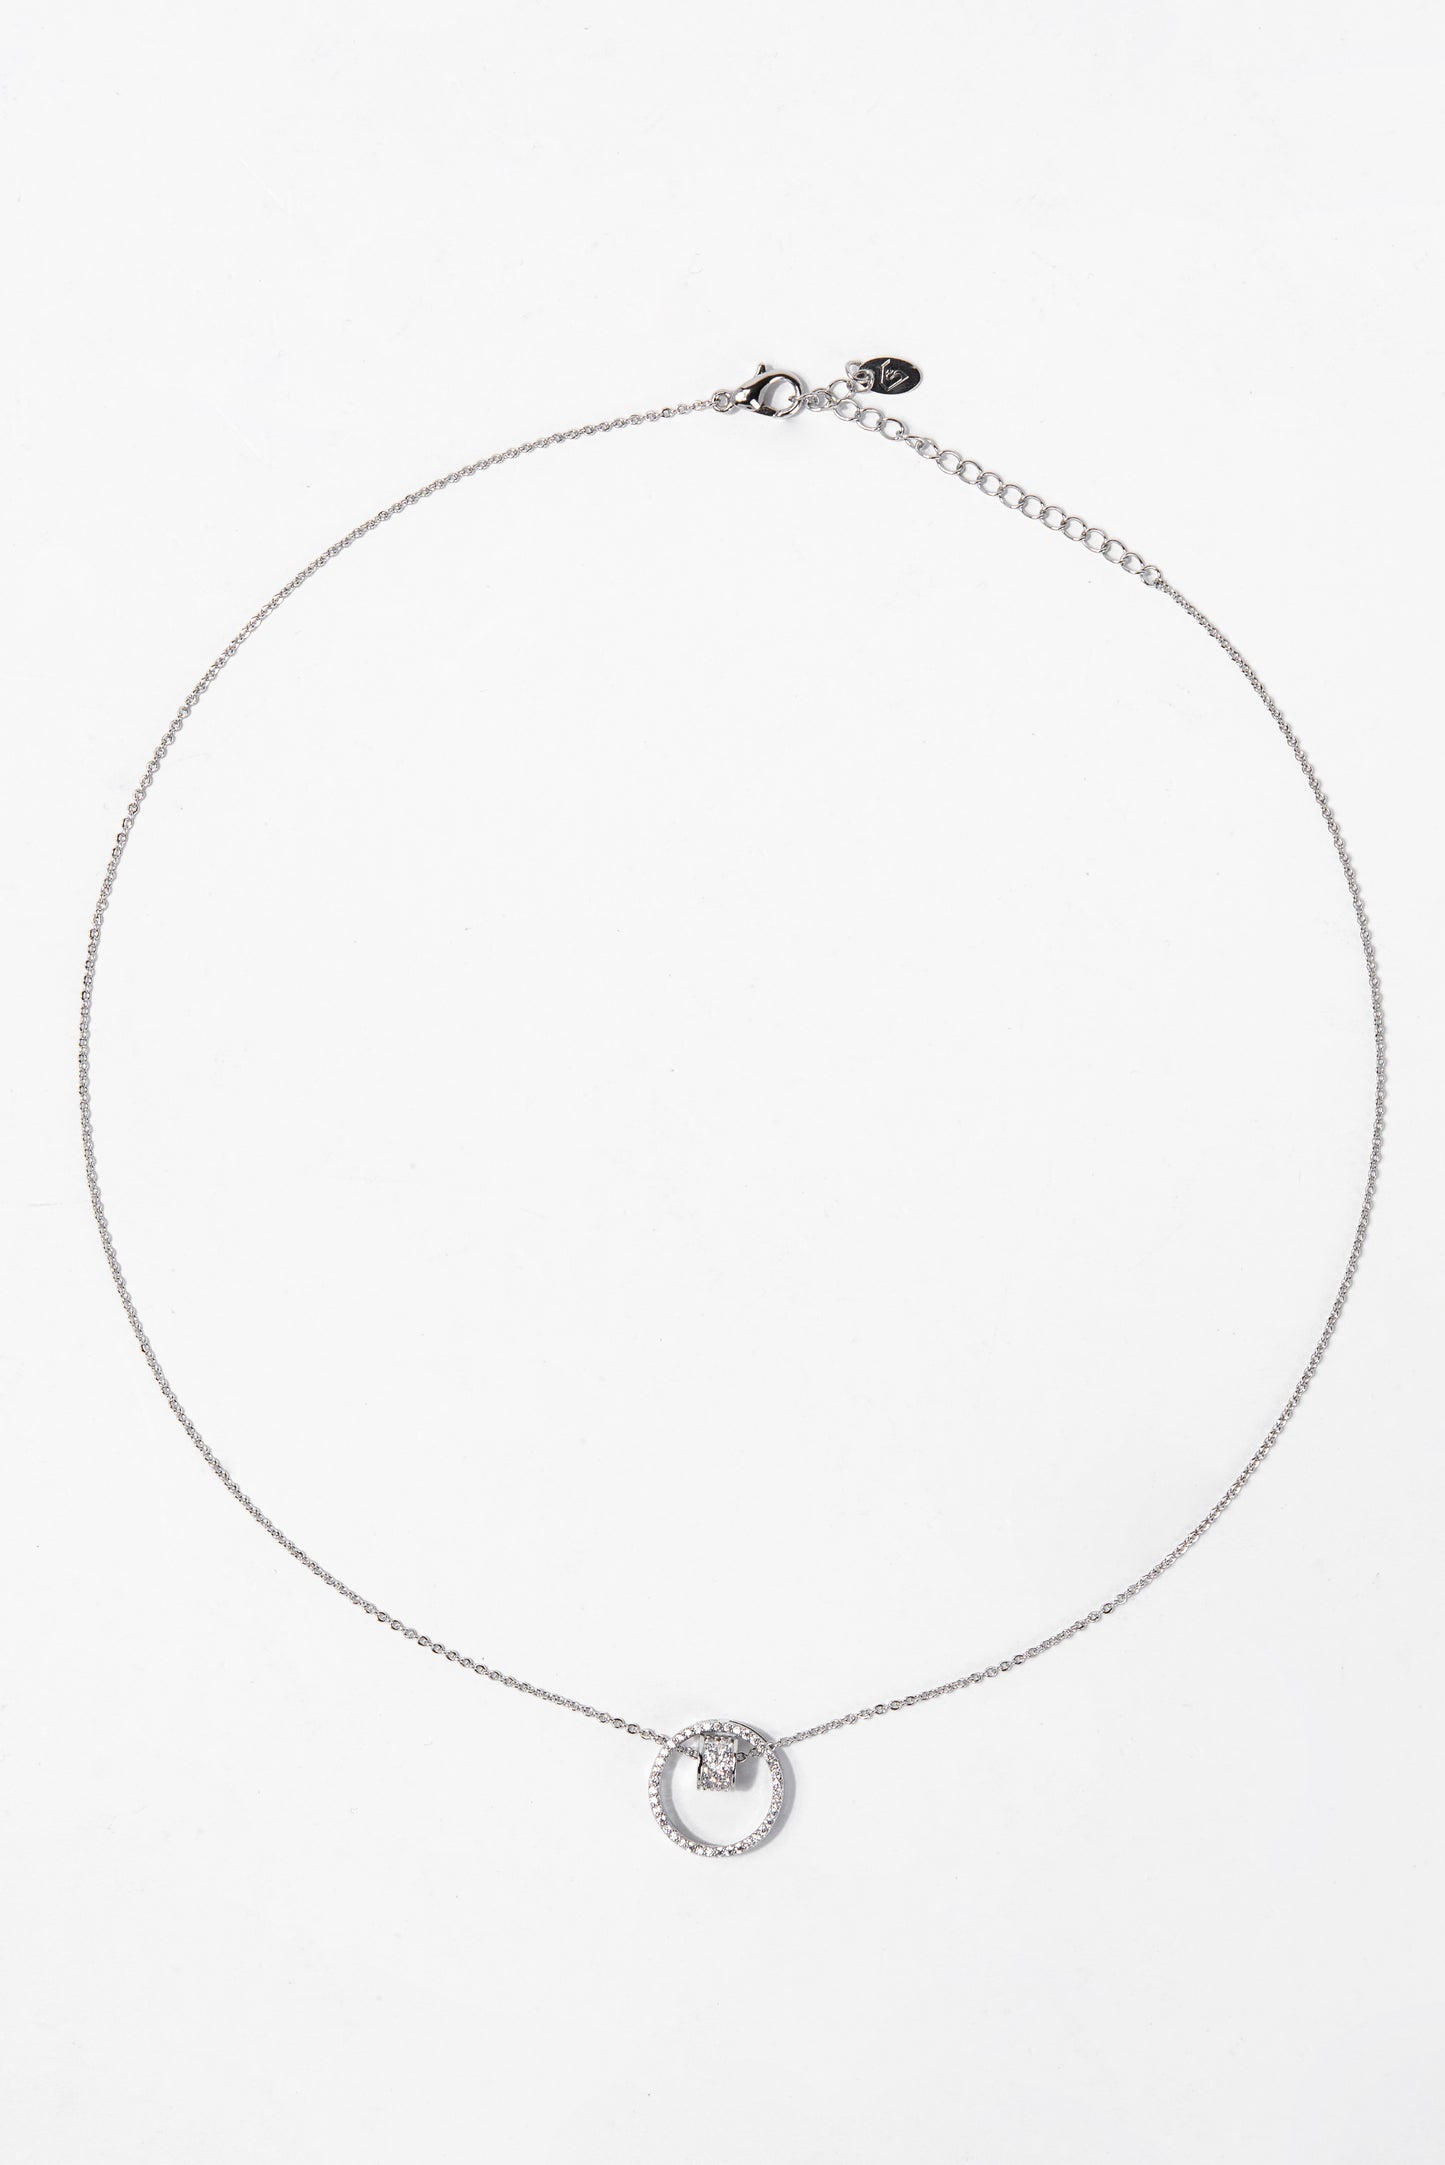 Delaina CZ White Gold Plated Necklace